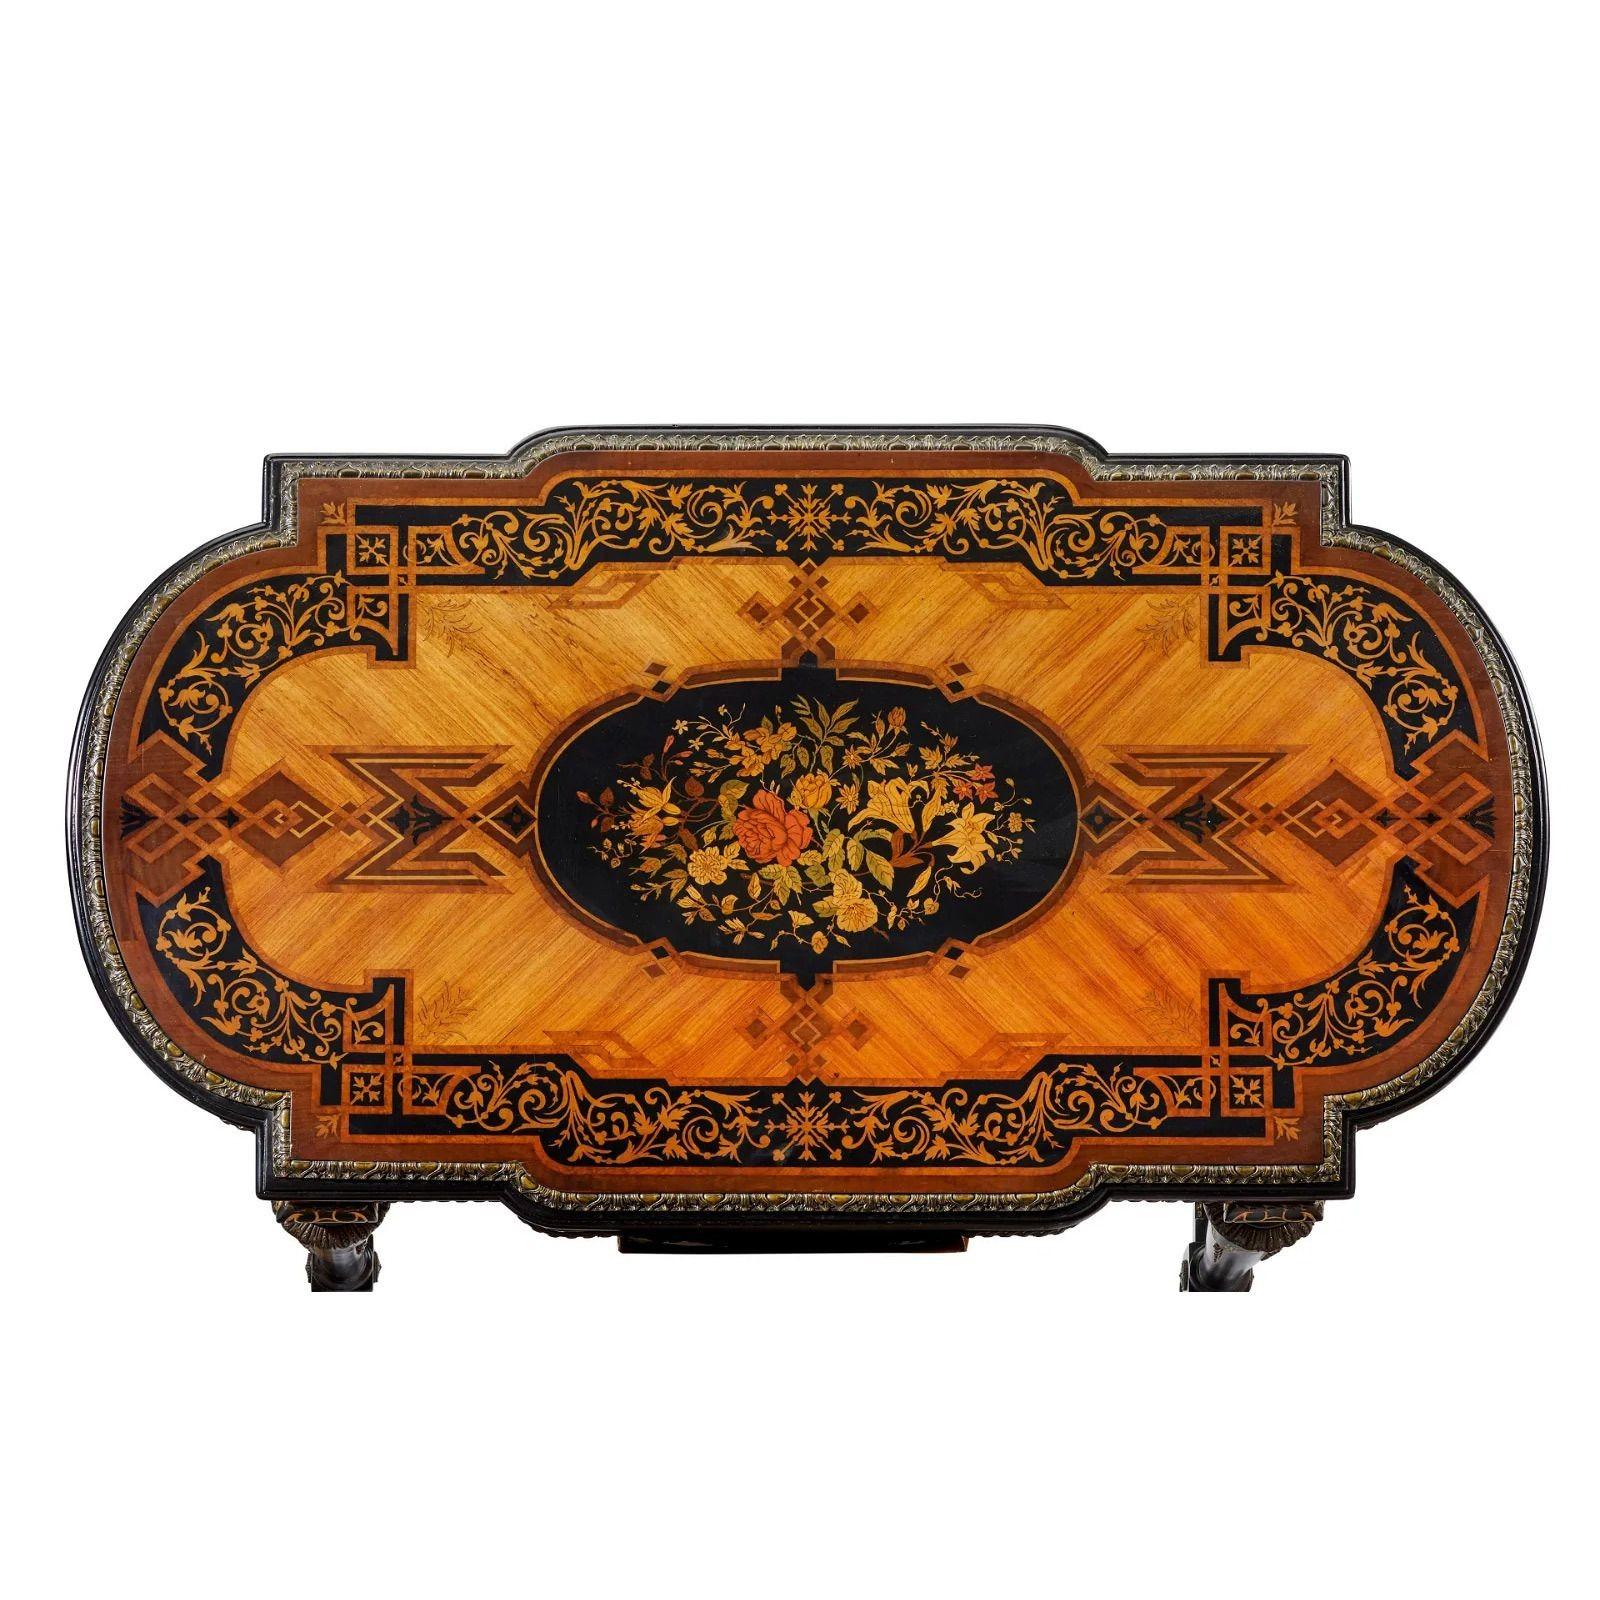 Italian Renaissance Revival Library table, Mid/late 19th century

In satinwood, burl, ebony, and other timber with marquetry veneered top with floral banding and central plaque, bronze mounted with gilt and ebonized highlights
